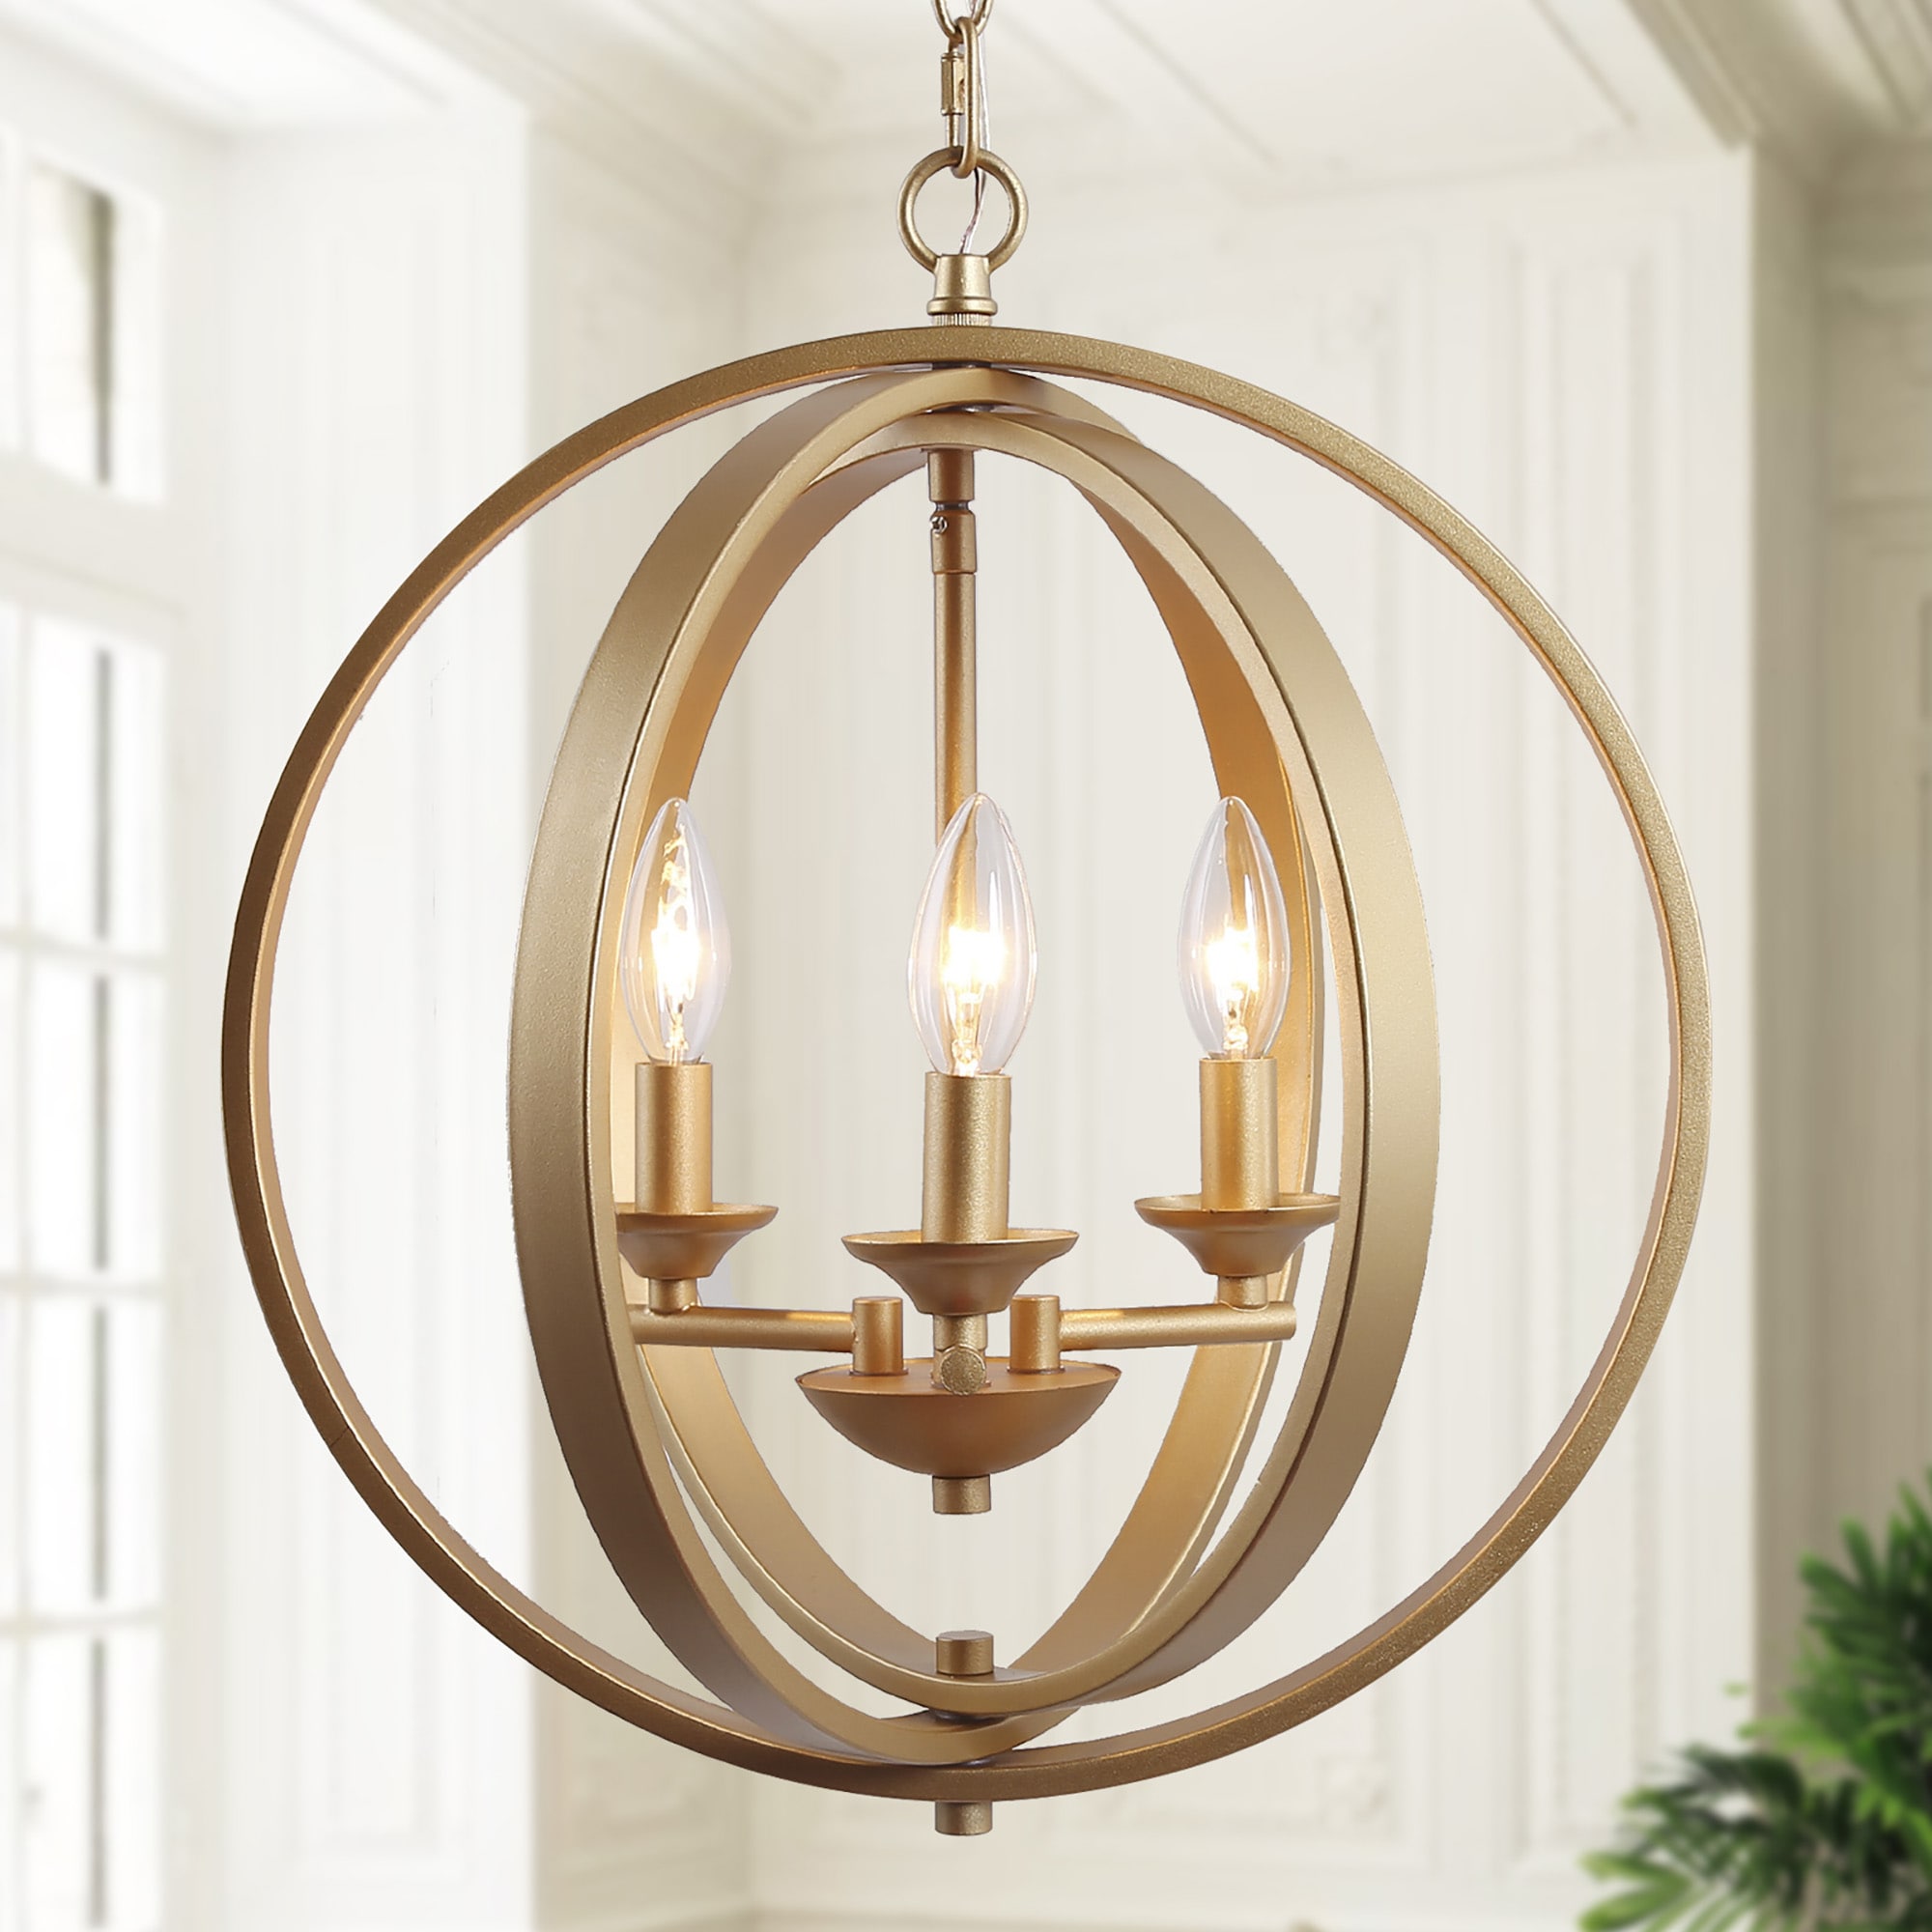 Style the 3-Light Chandelier Modern/Contemporary LED Classic rated Gold Uolfin Dry Chandeliers Globe at Candle in department with